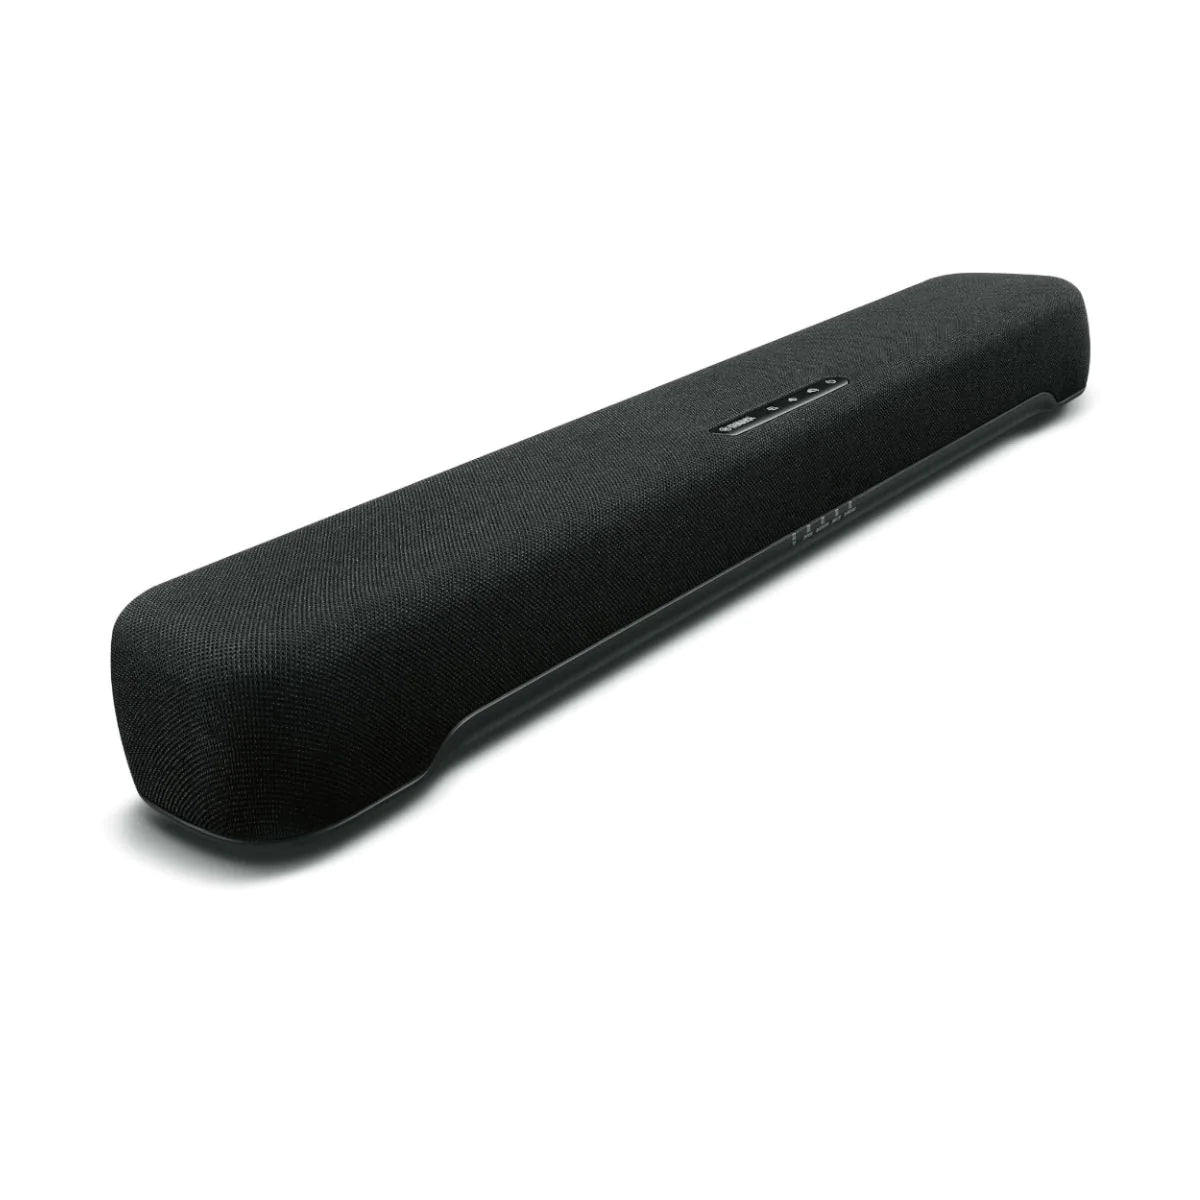 Yamaha SR-C20A Compact Sound Bar With Built-in Subwoofer